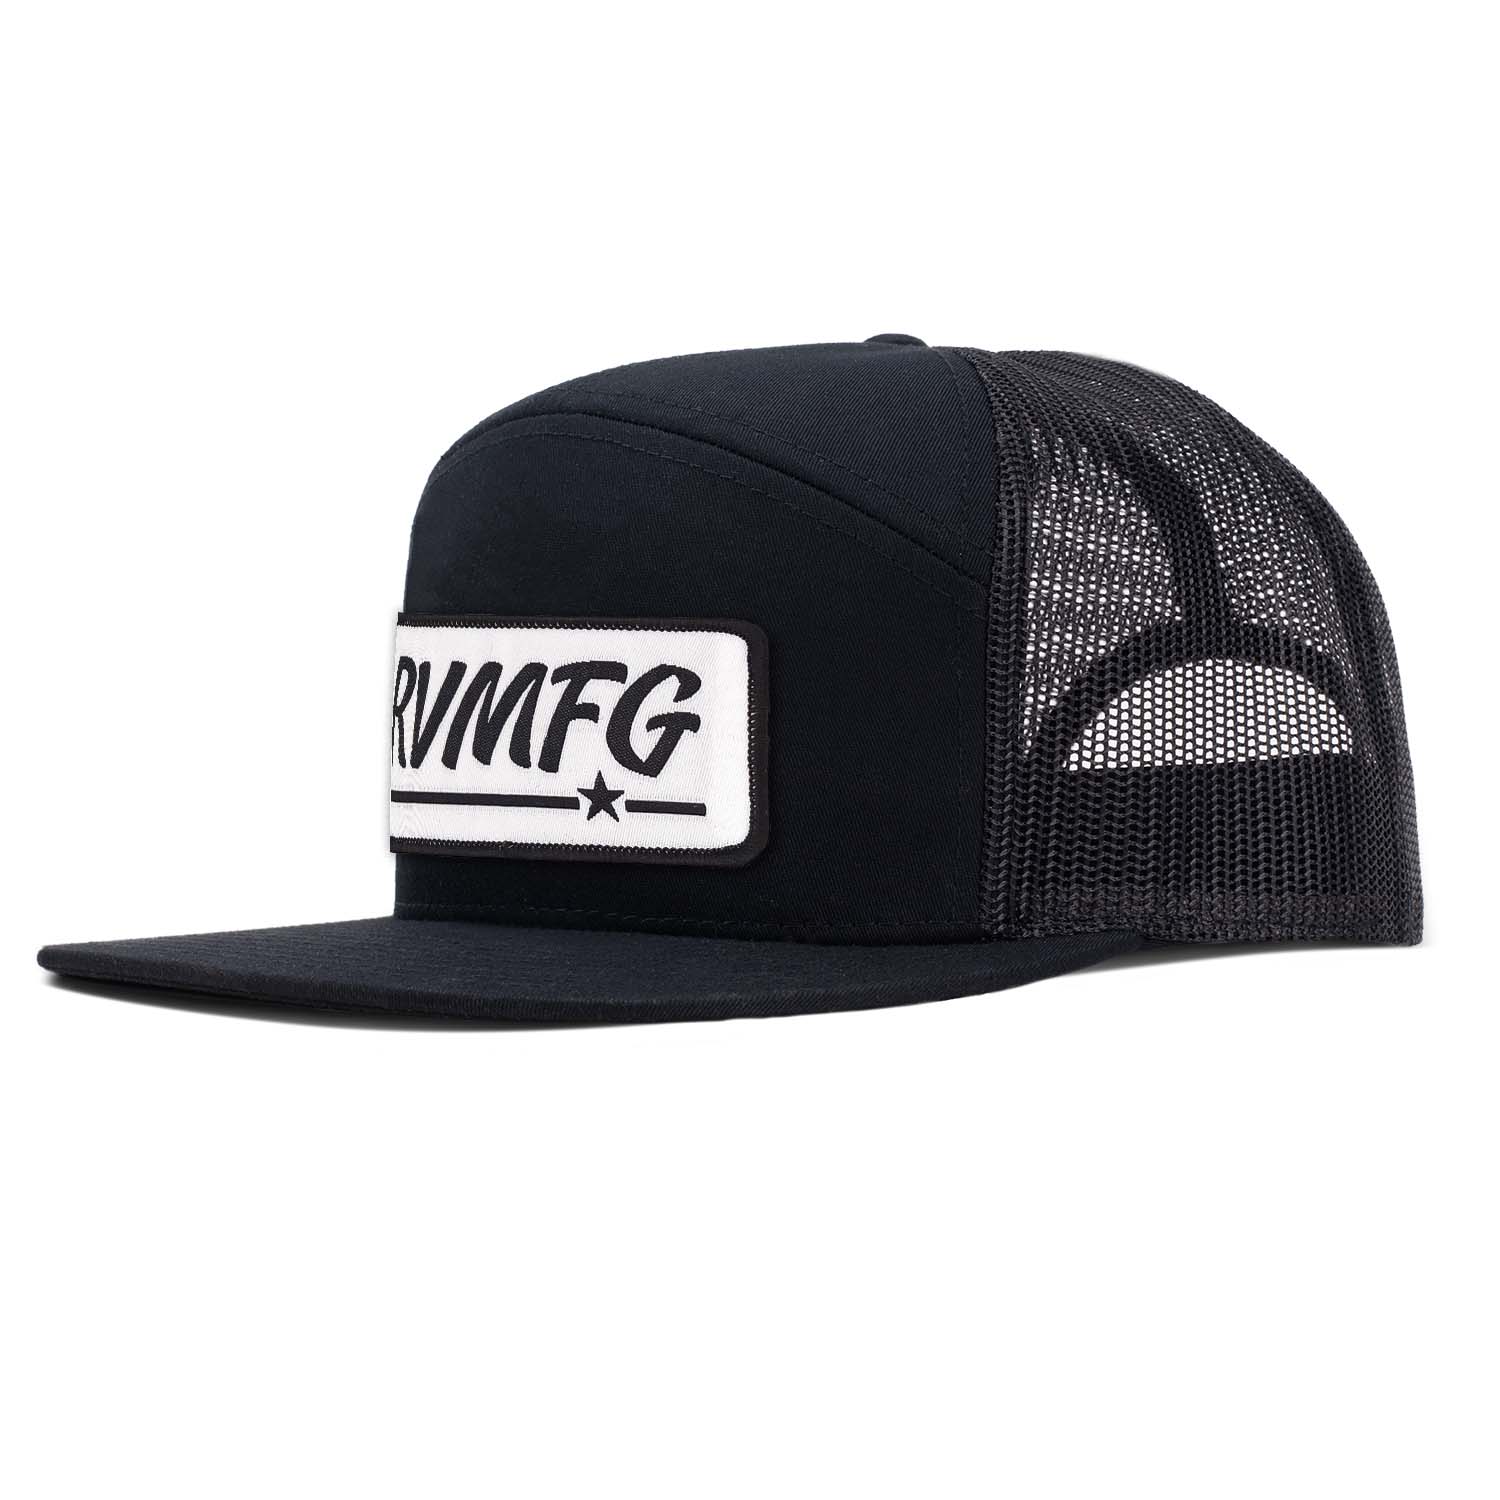 Revolution Mfg all black 7 panel flat bill with white RVMFG woven patch with black letters and black border